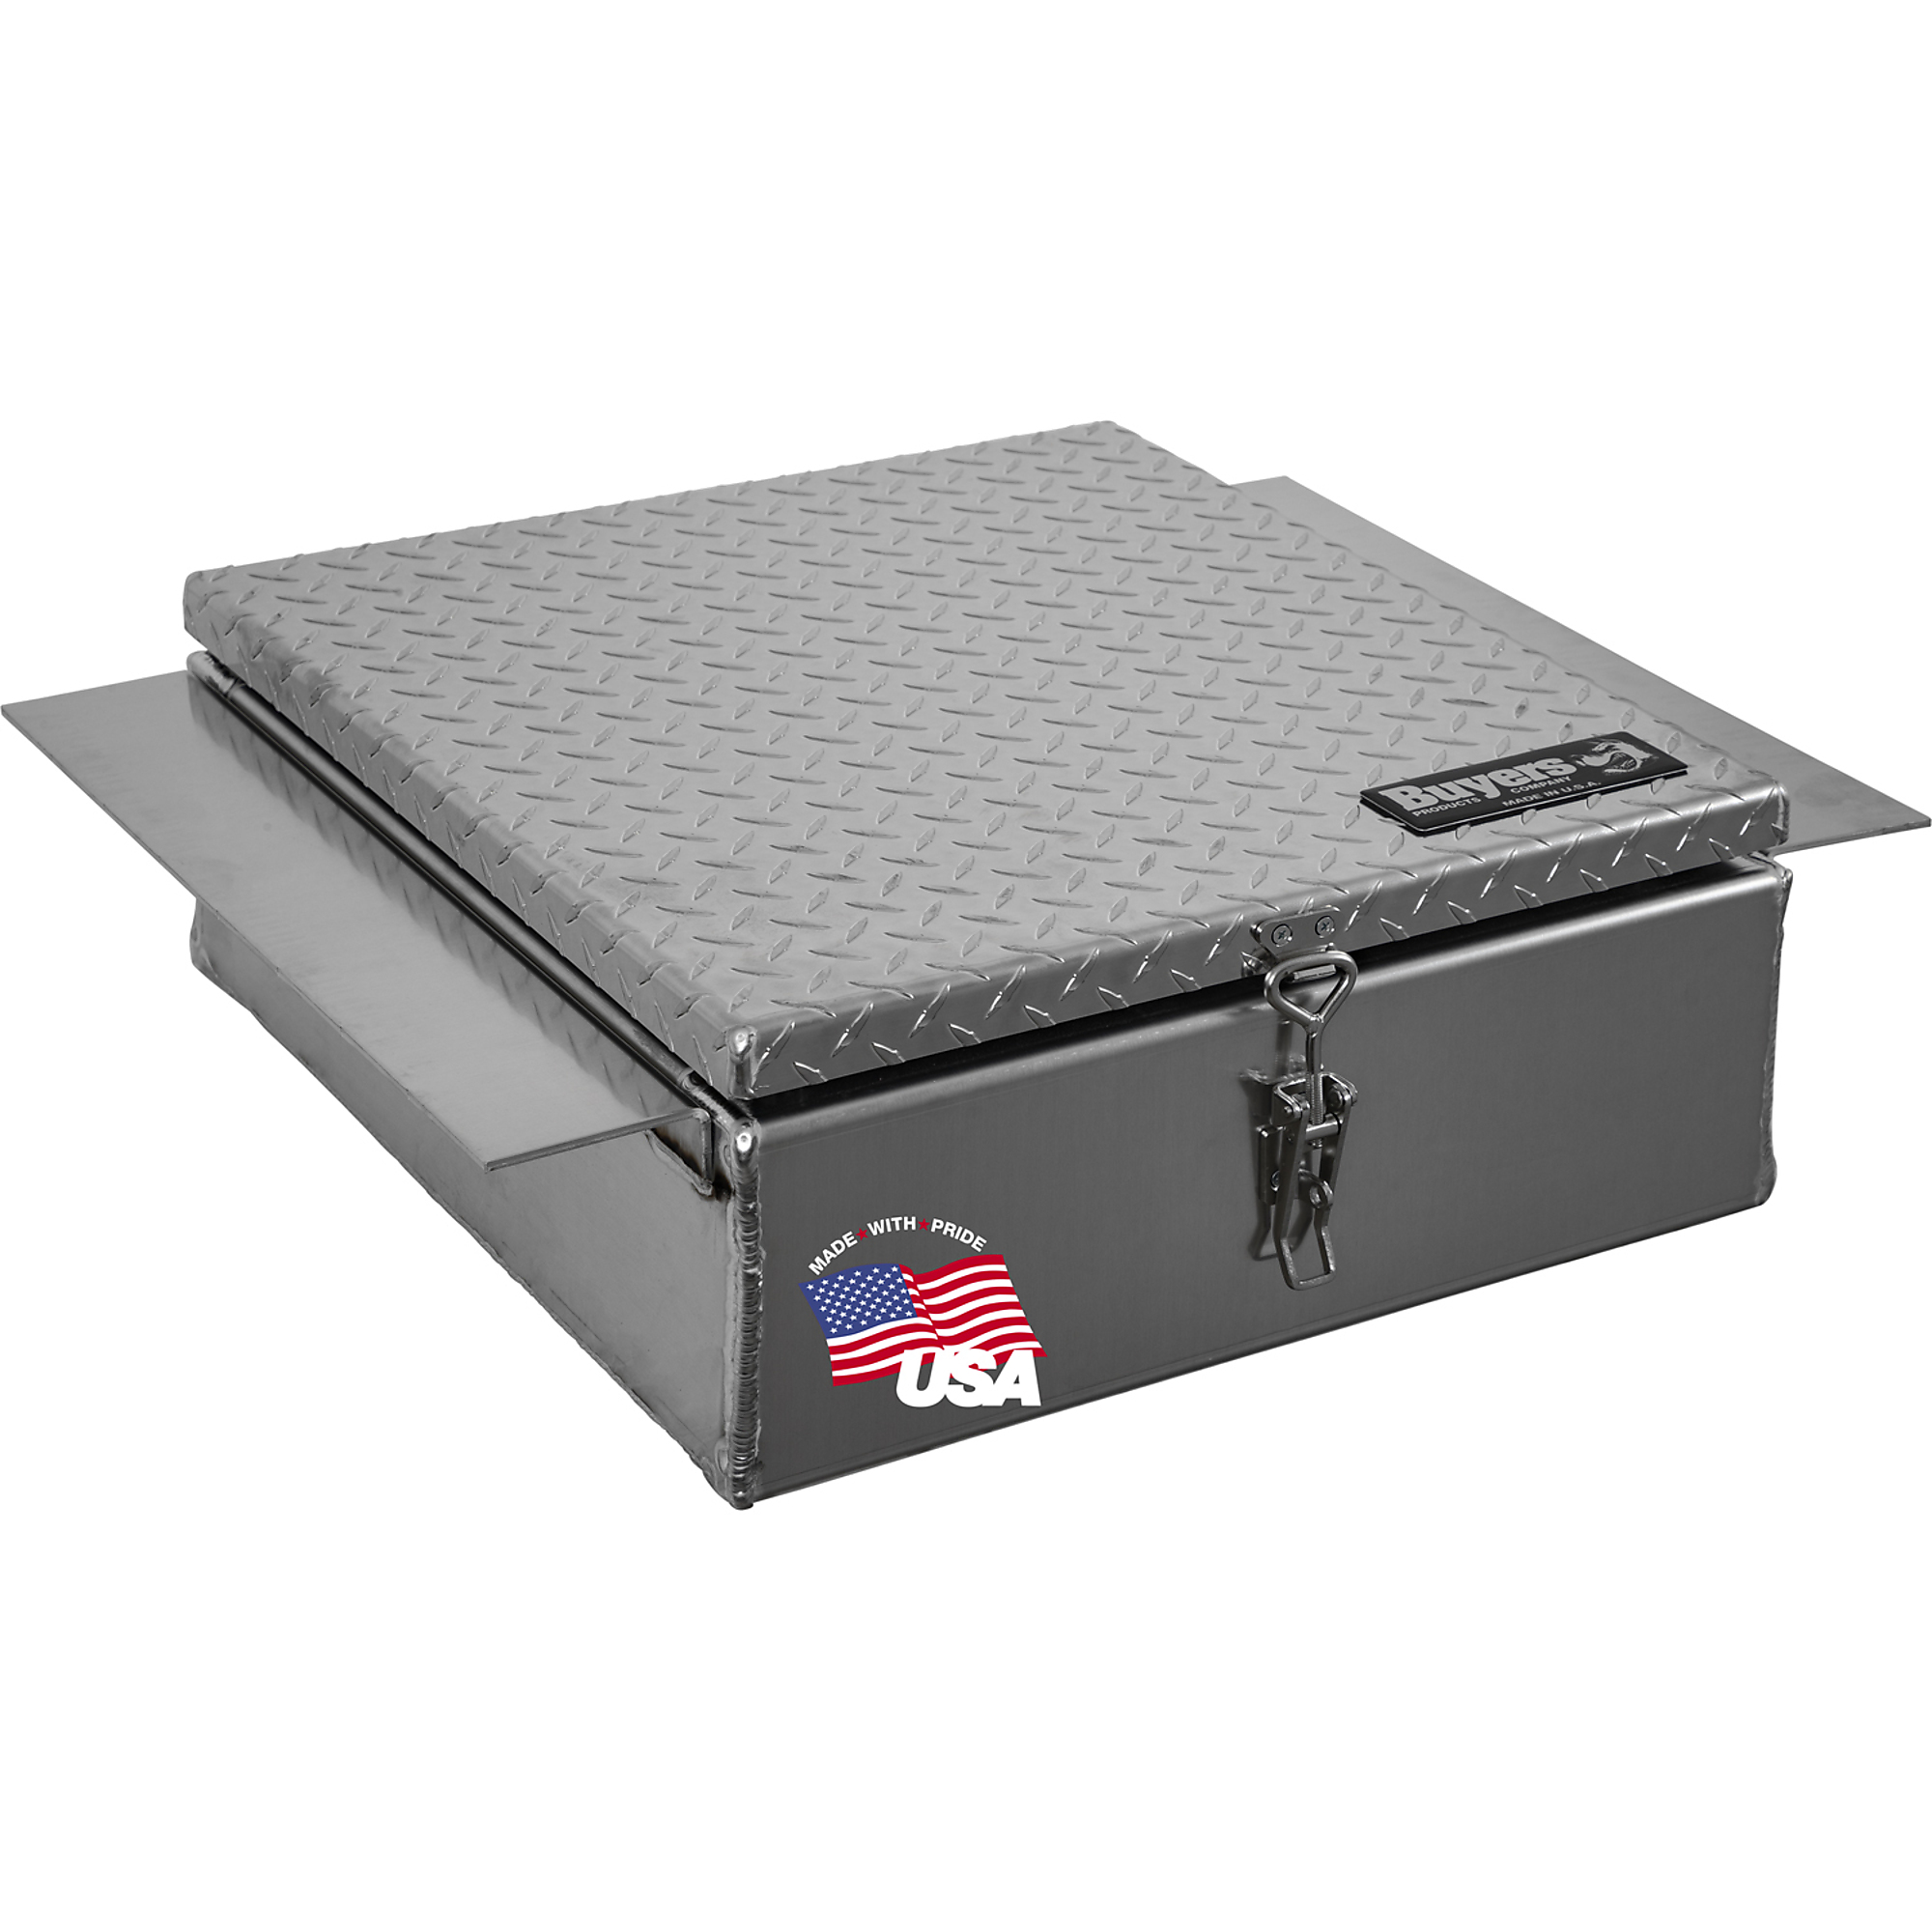 Buyers Products, 22Inch Diamond Tread Aluminum In-Frame Truck Box, Width 22 in, Material Aluminum, Color Finish Diamond Plate Silver, Model 1705384